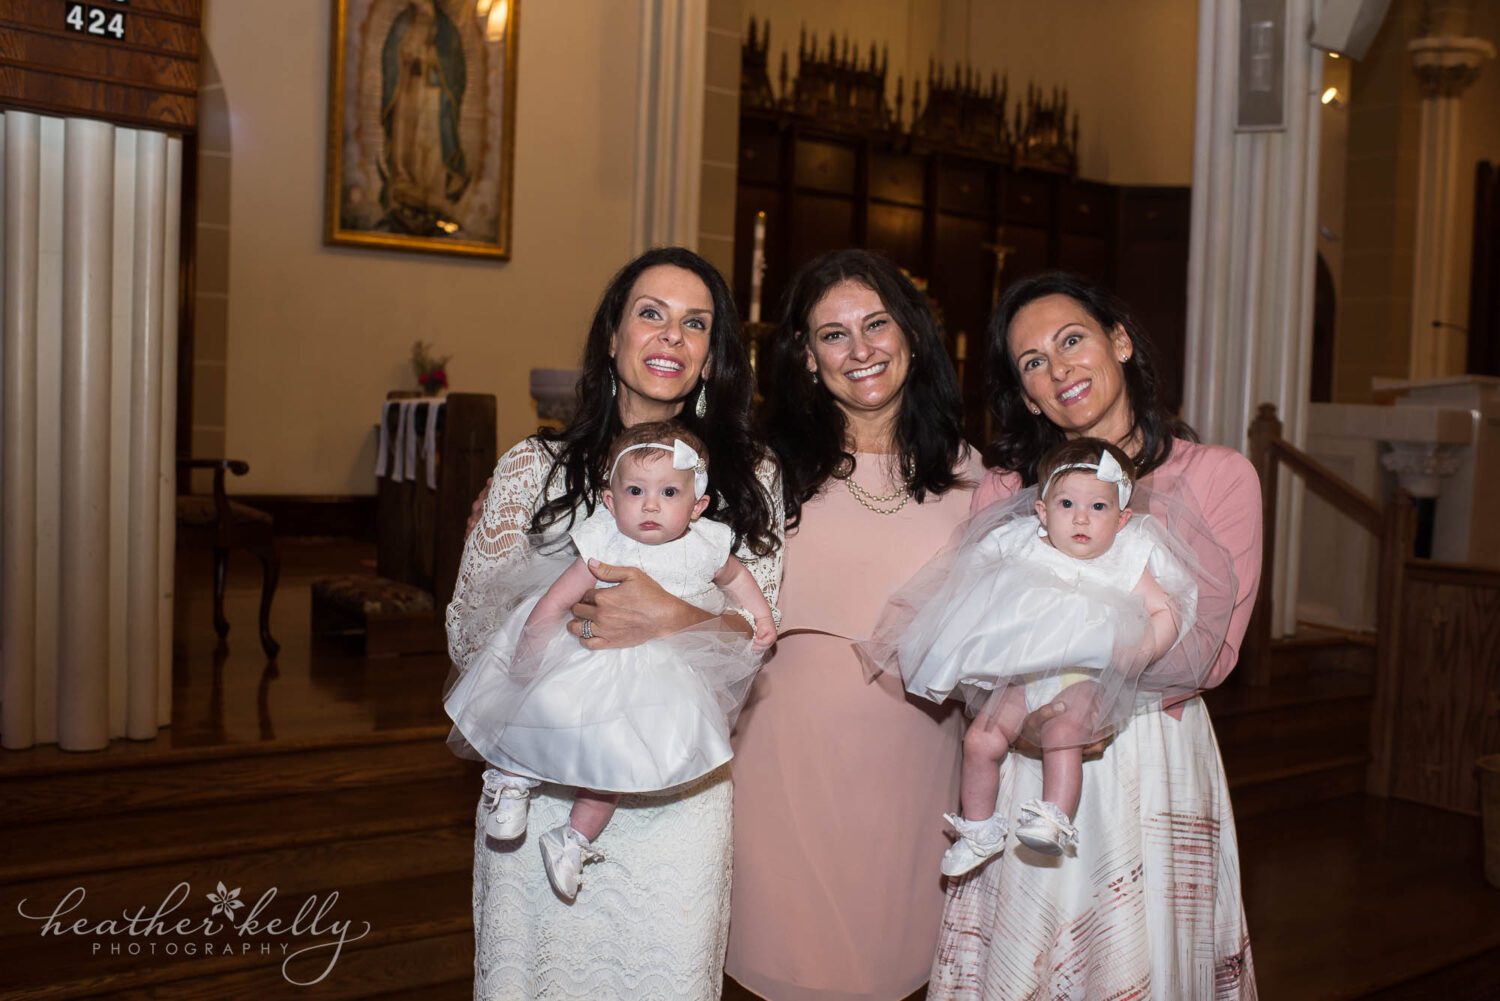 Three sisters and two baby twins at a church for a baptism. 